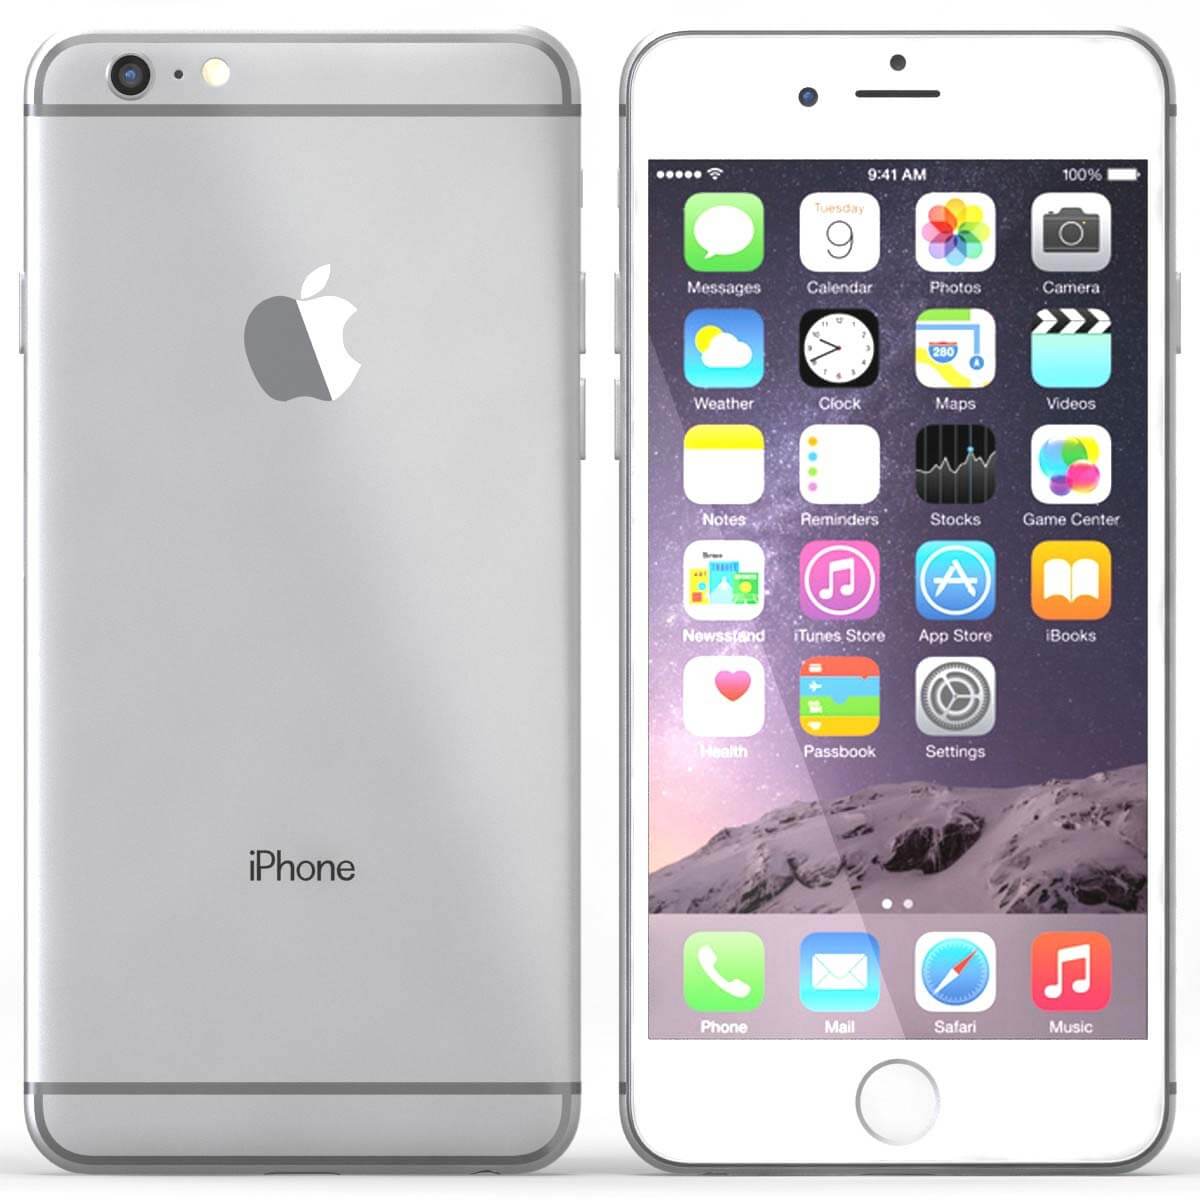 Apple Event - iPhone 6 S (space grey colour)